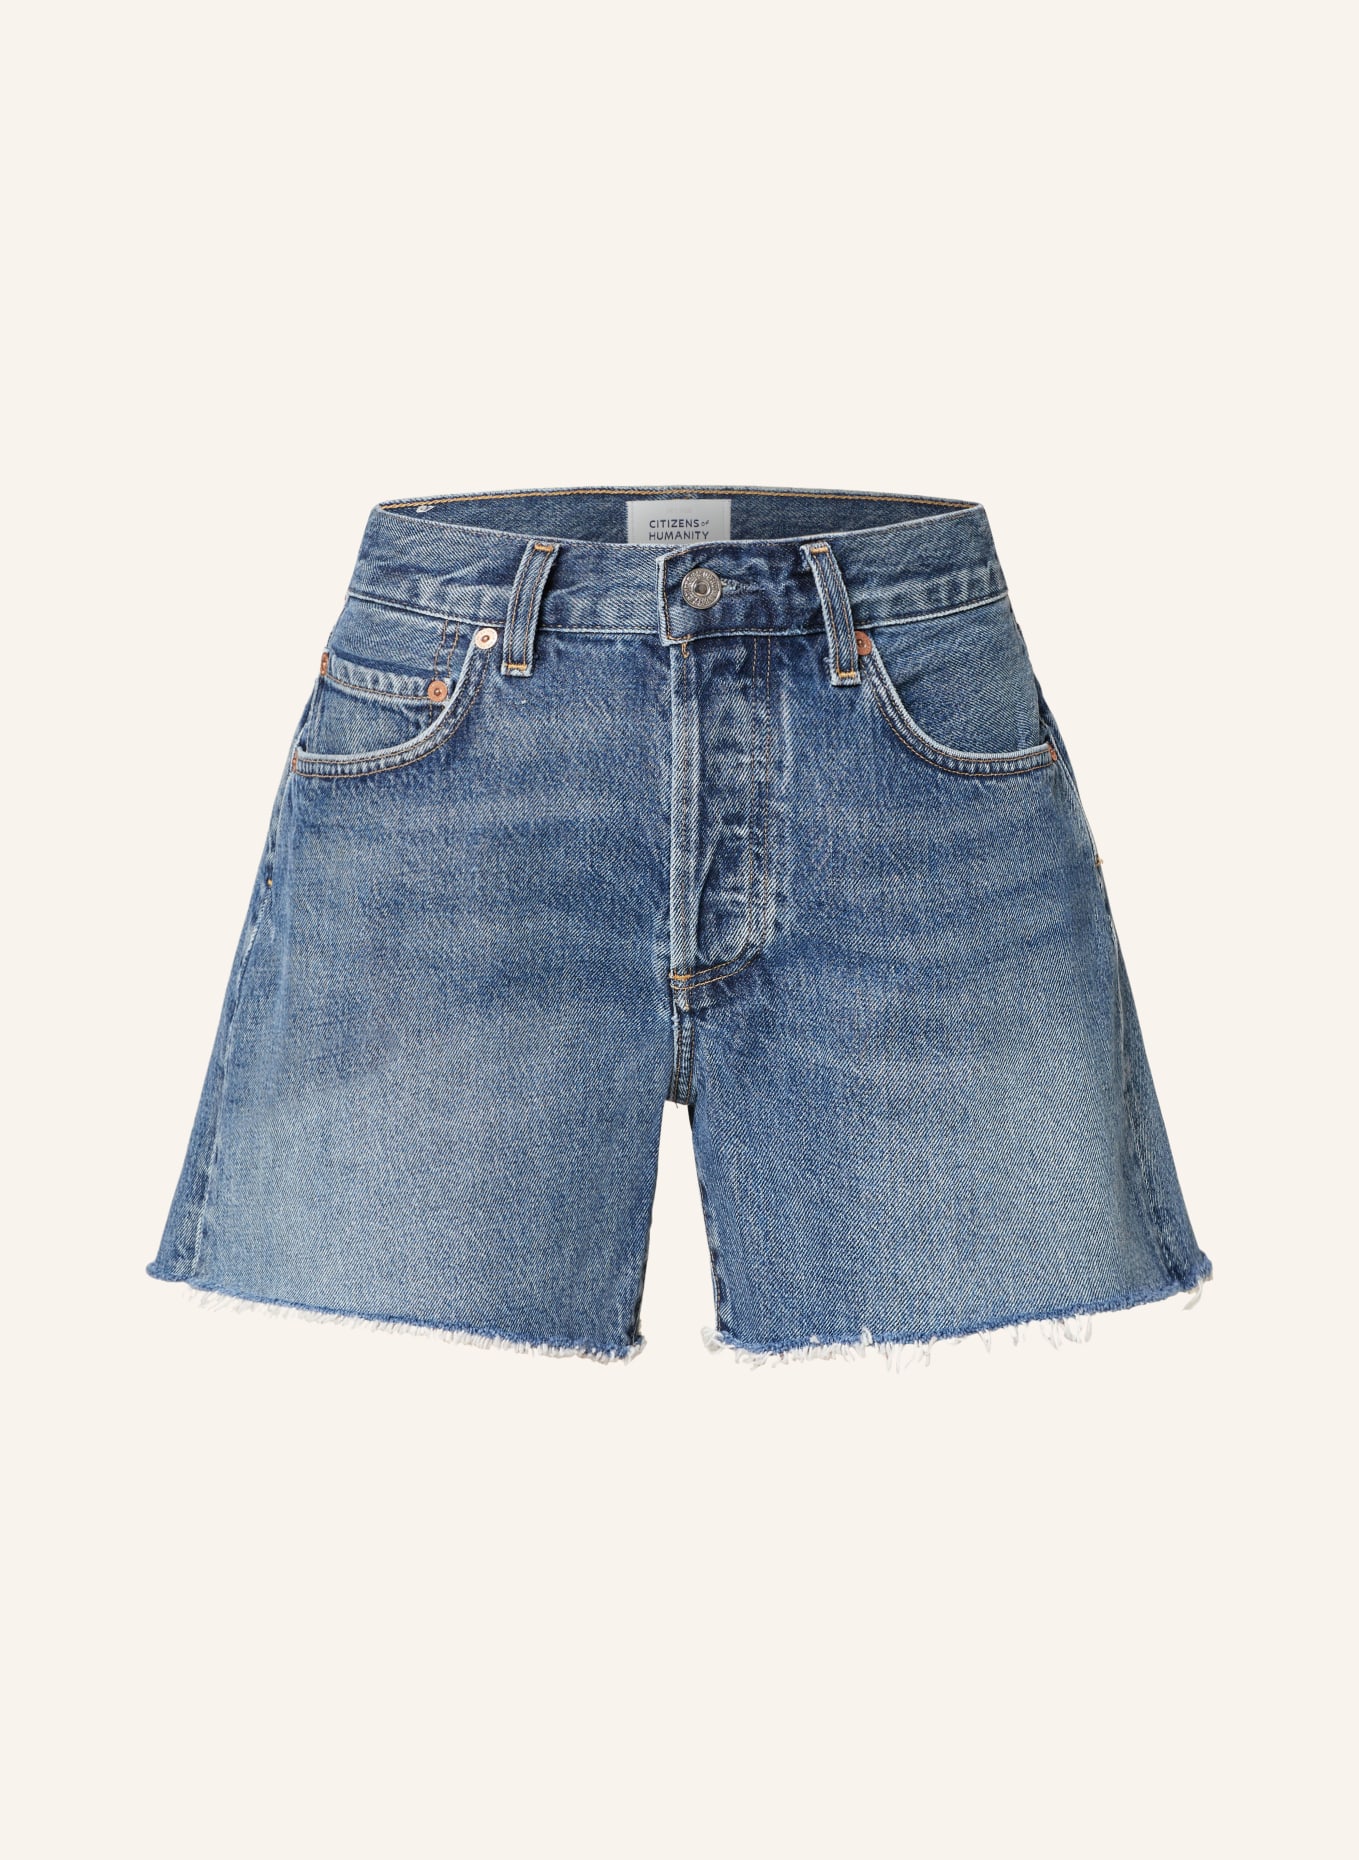 CITIZENS of HUMANITY Denim shorts ANNABELLE, Color: yves med ind (Image 1)